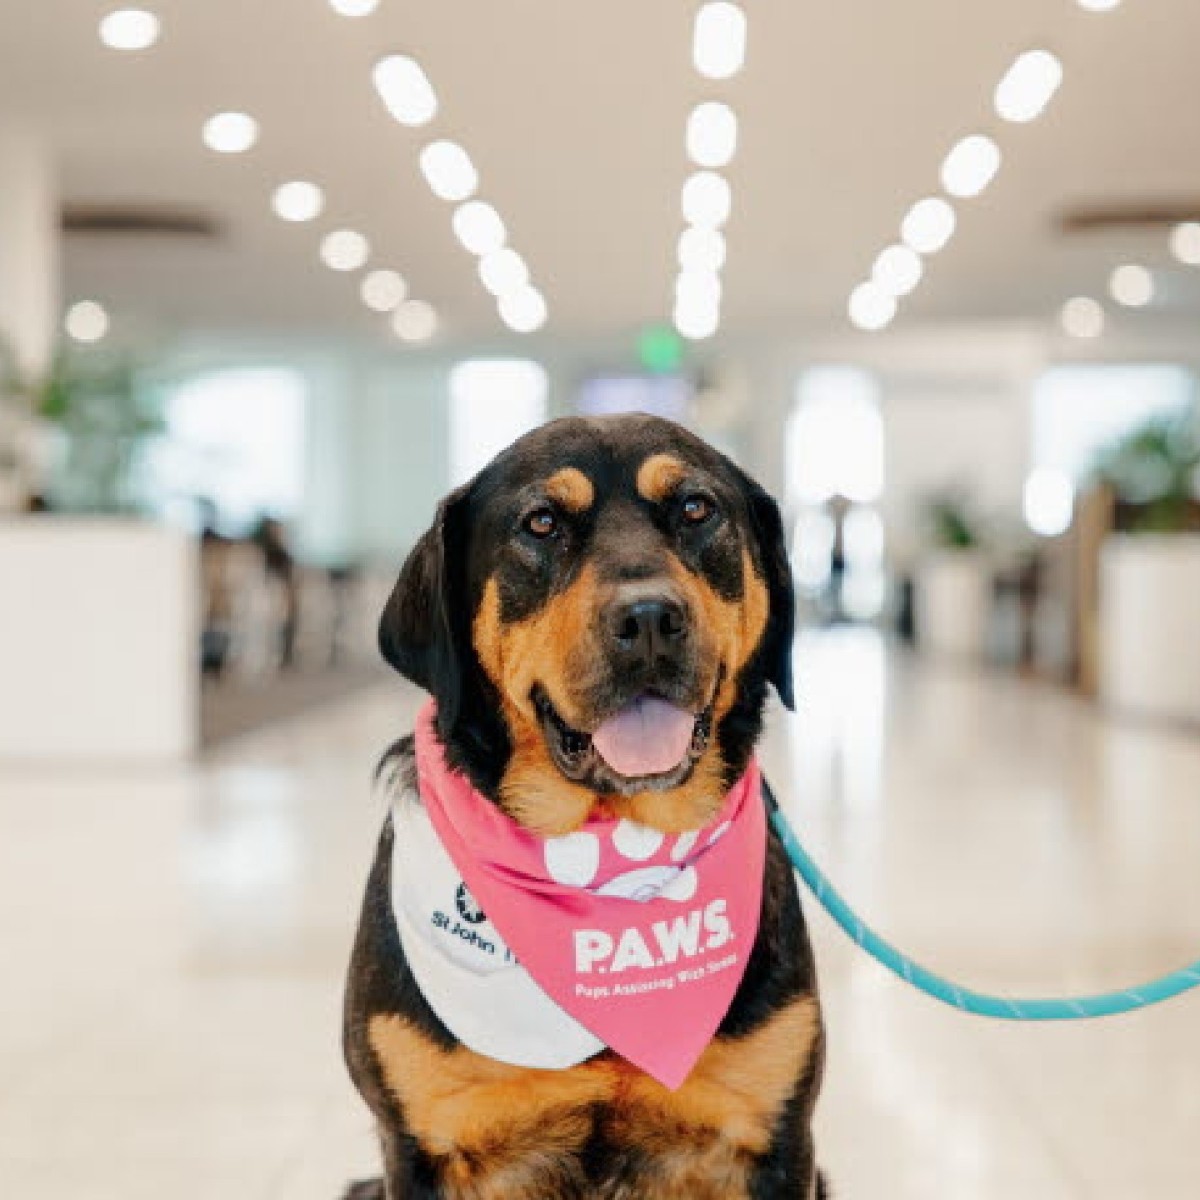 Flying to or from Christchurch during the school hols? Check-in to see our Therapy Pets for some first-class pats and belly rubs to help feel more relaxed. Thanks to our friends and co-captains at @CHC_Airport ✈️ 📸 Christchurch Airport #Dog #StJohn #Travel